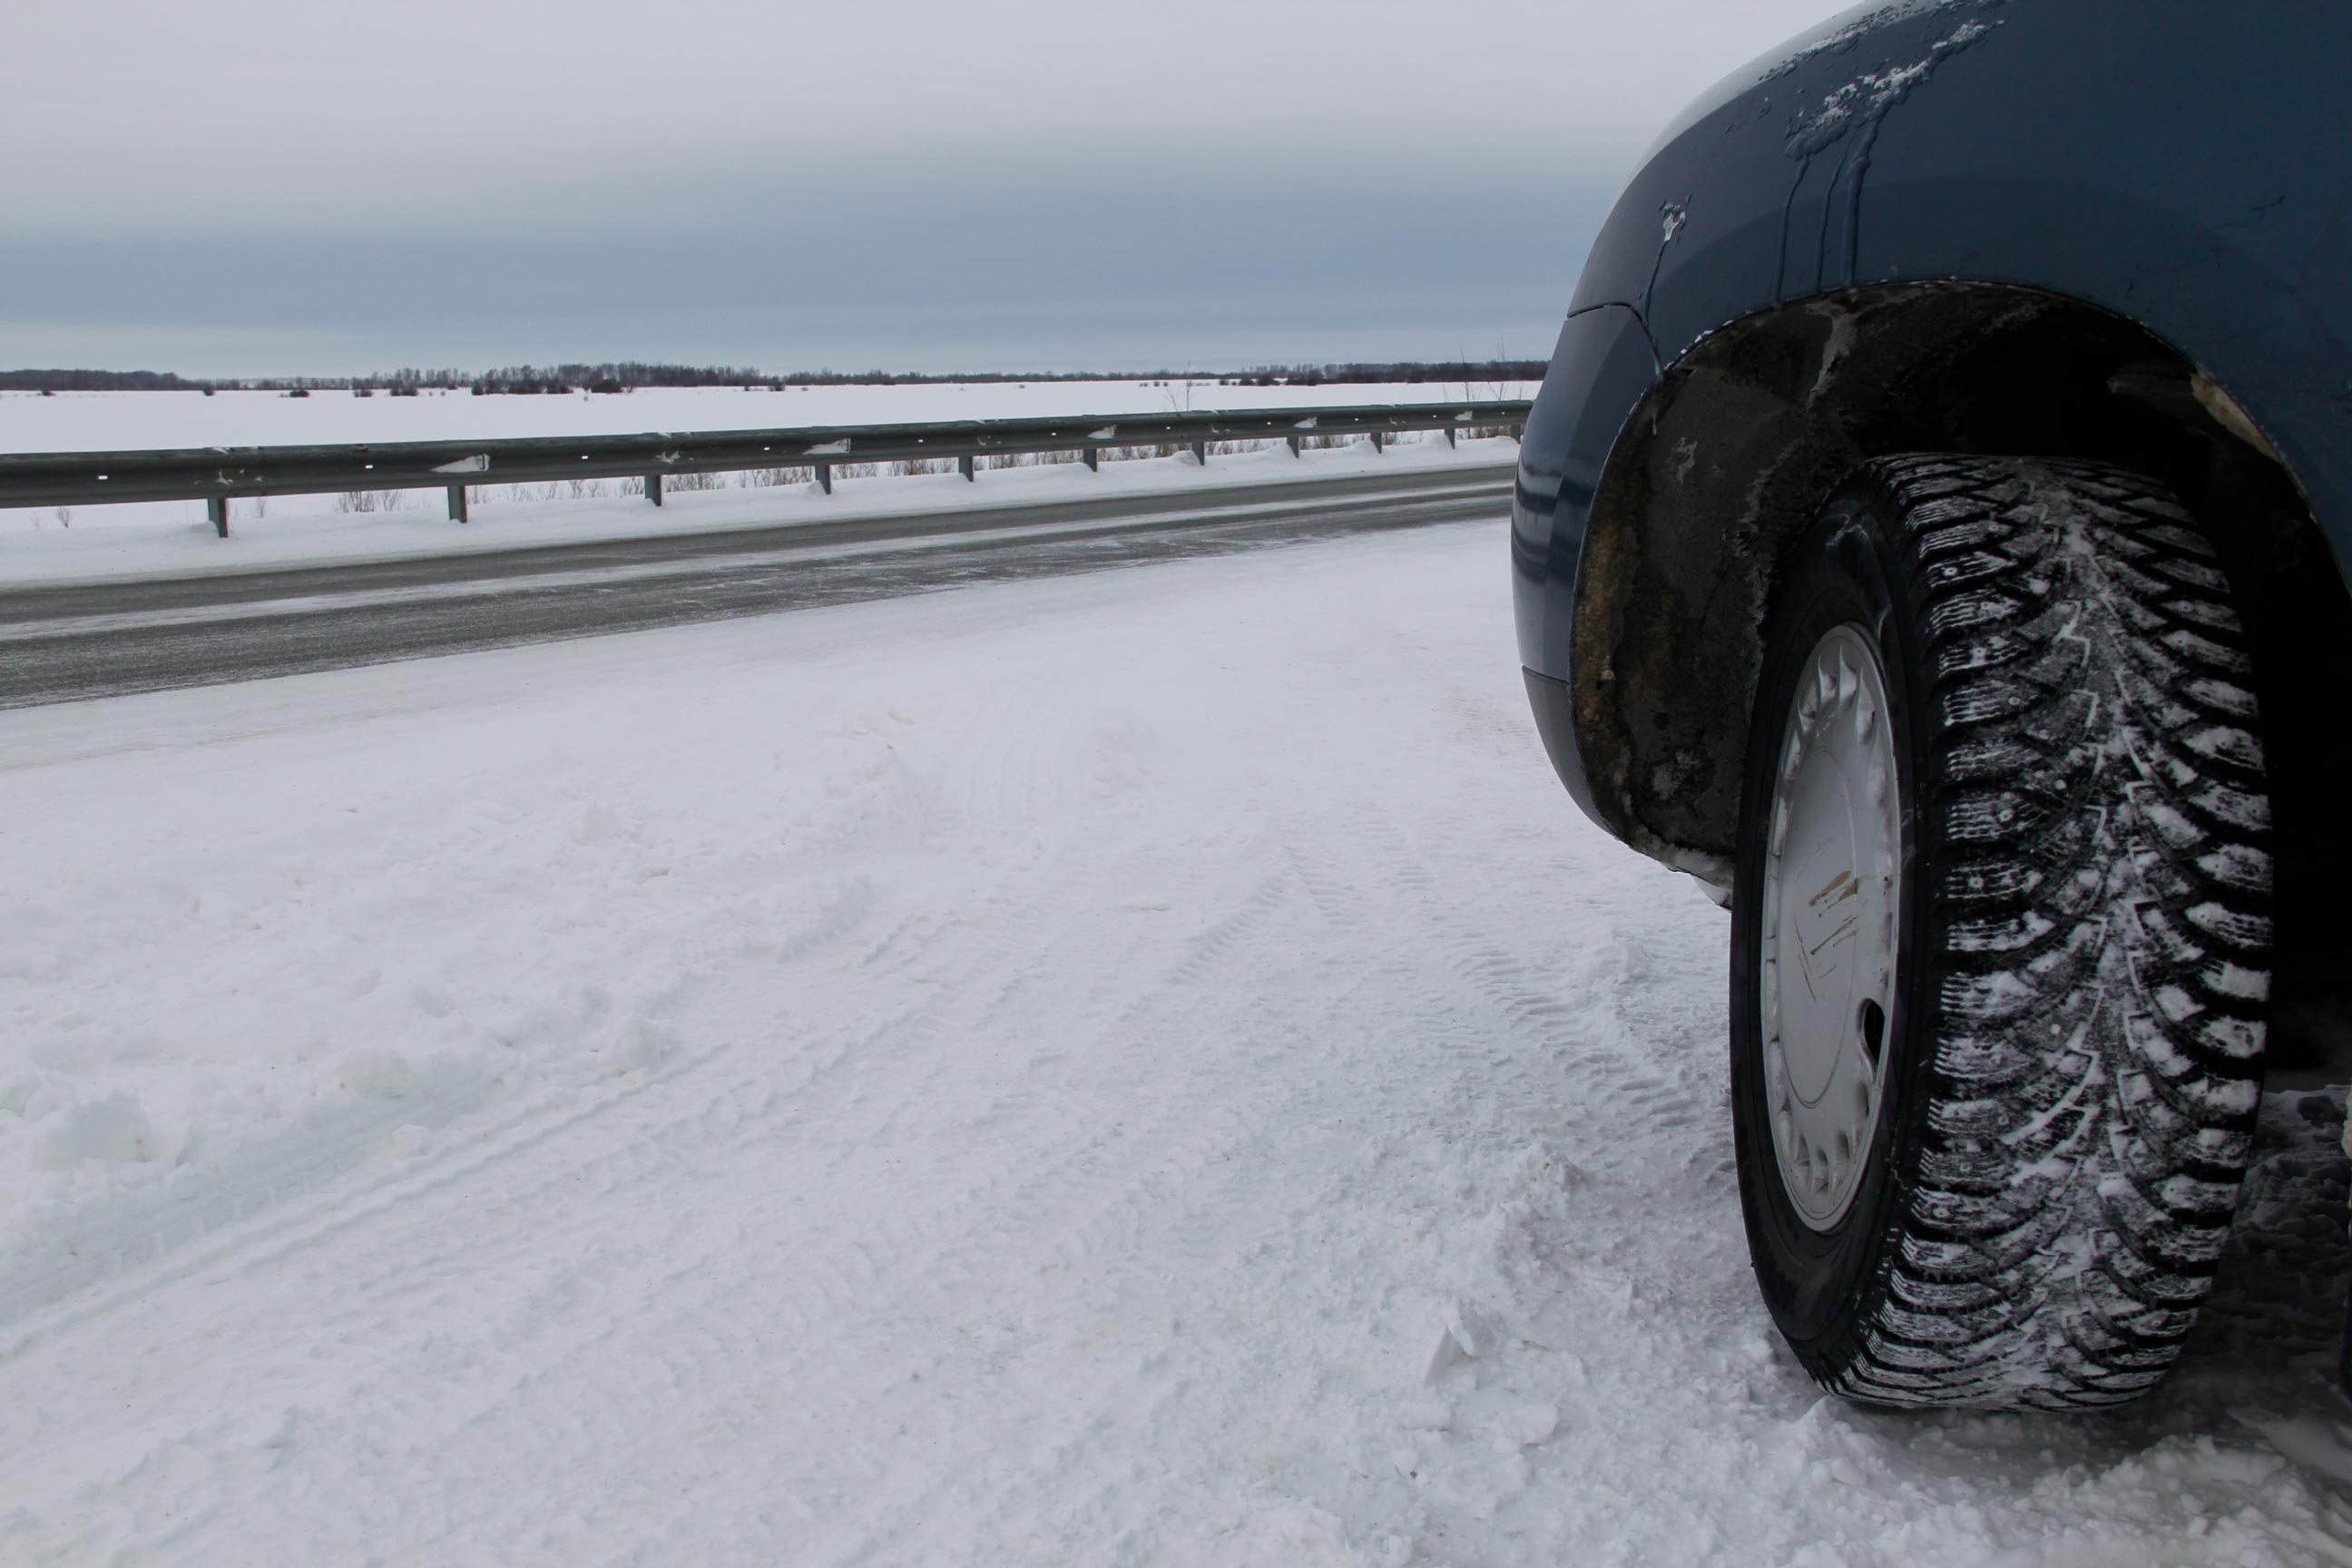 Winter tire tread patterns with large gaps vs summer tires